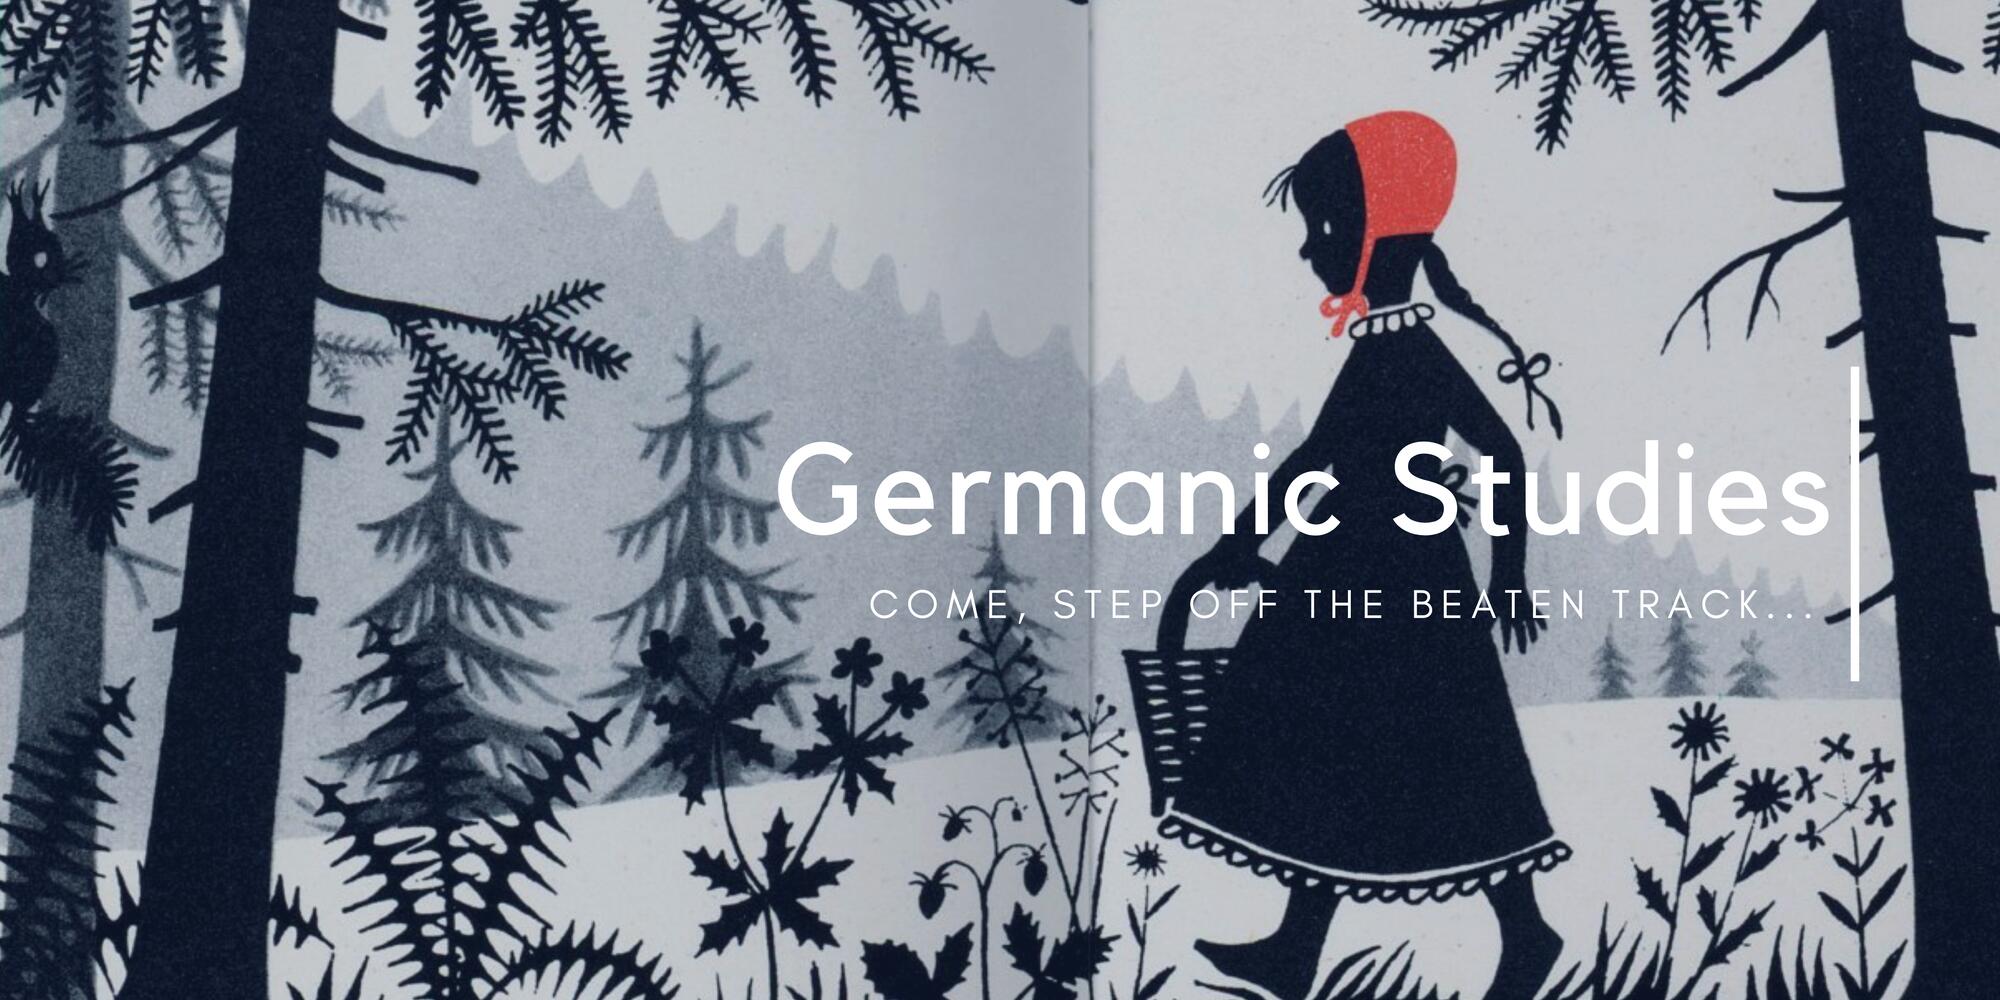 Come, step off the beaten track...with Germanic Studies